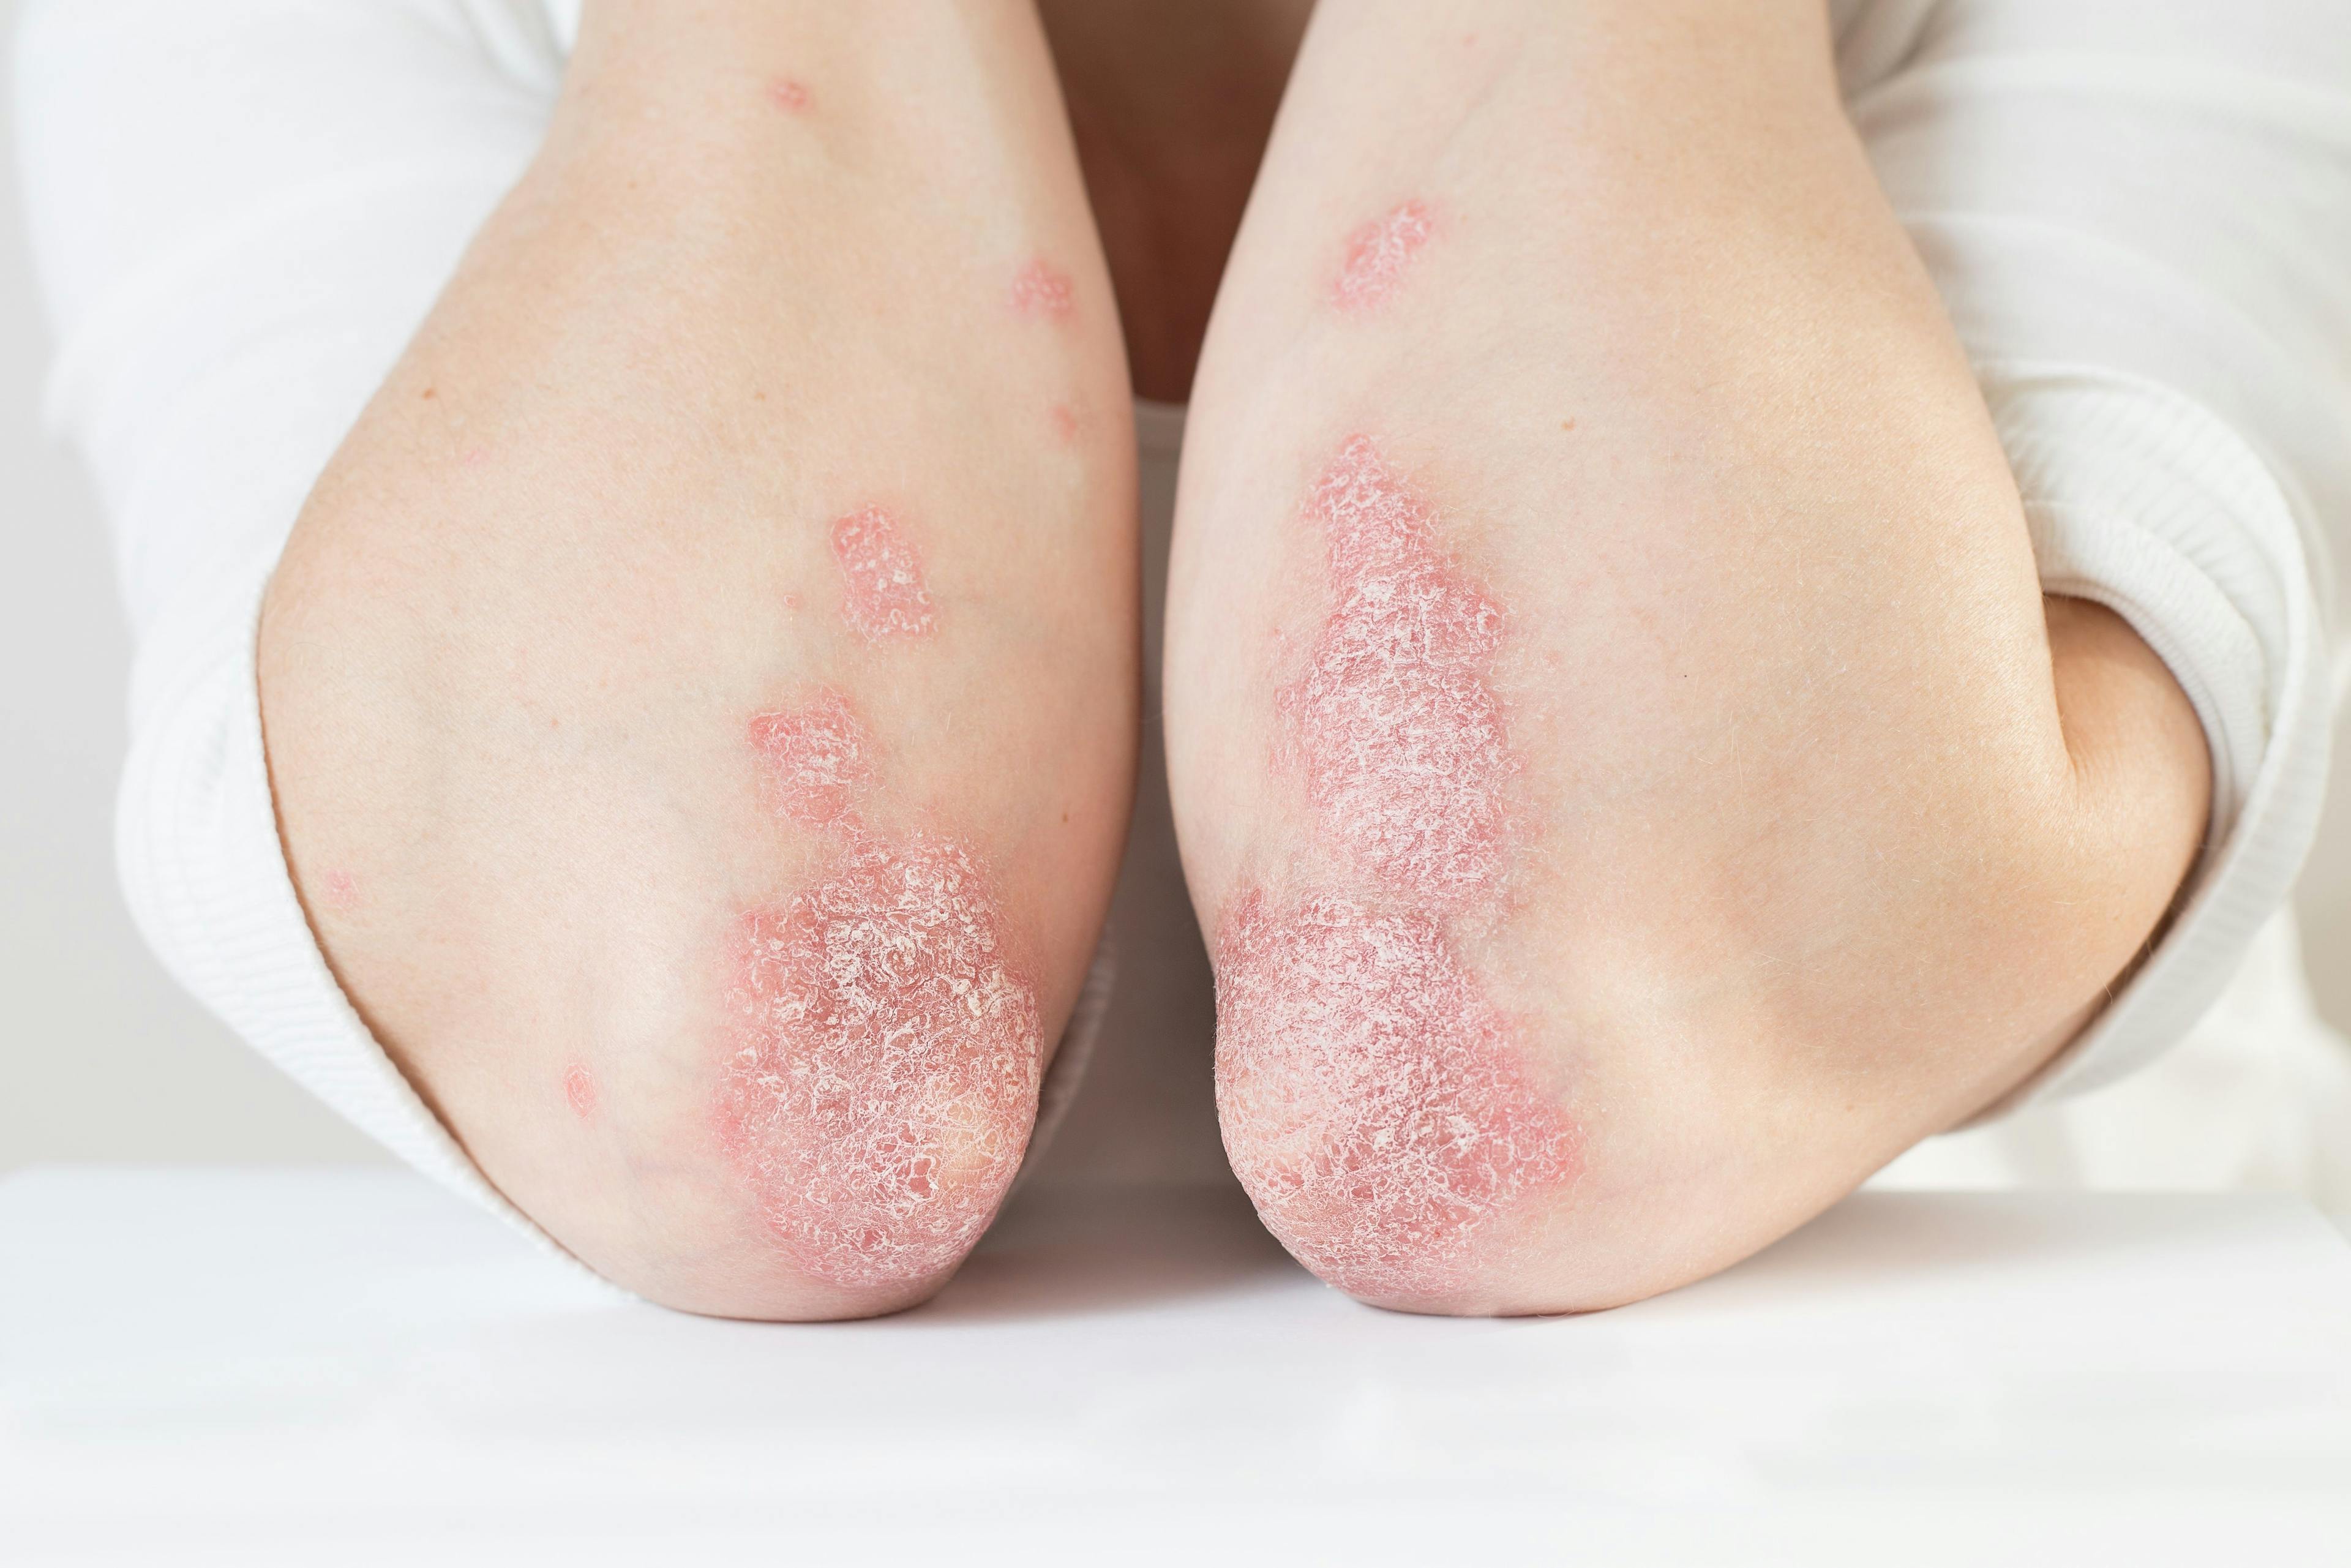 Study Explores Efficacy of Topical MTX 